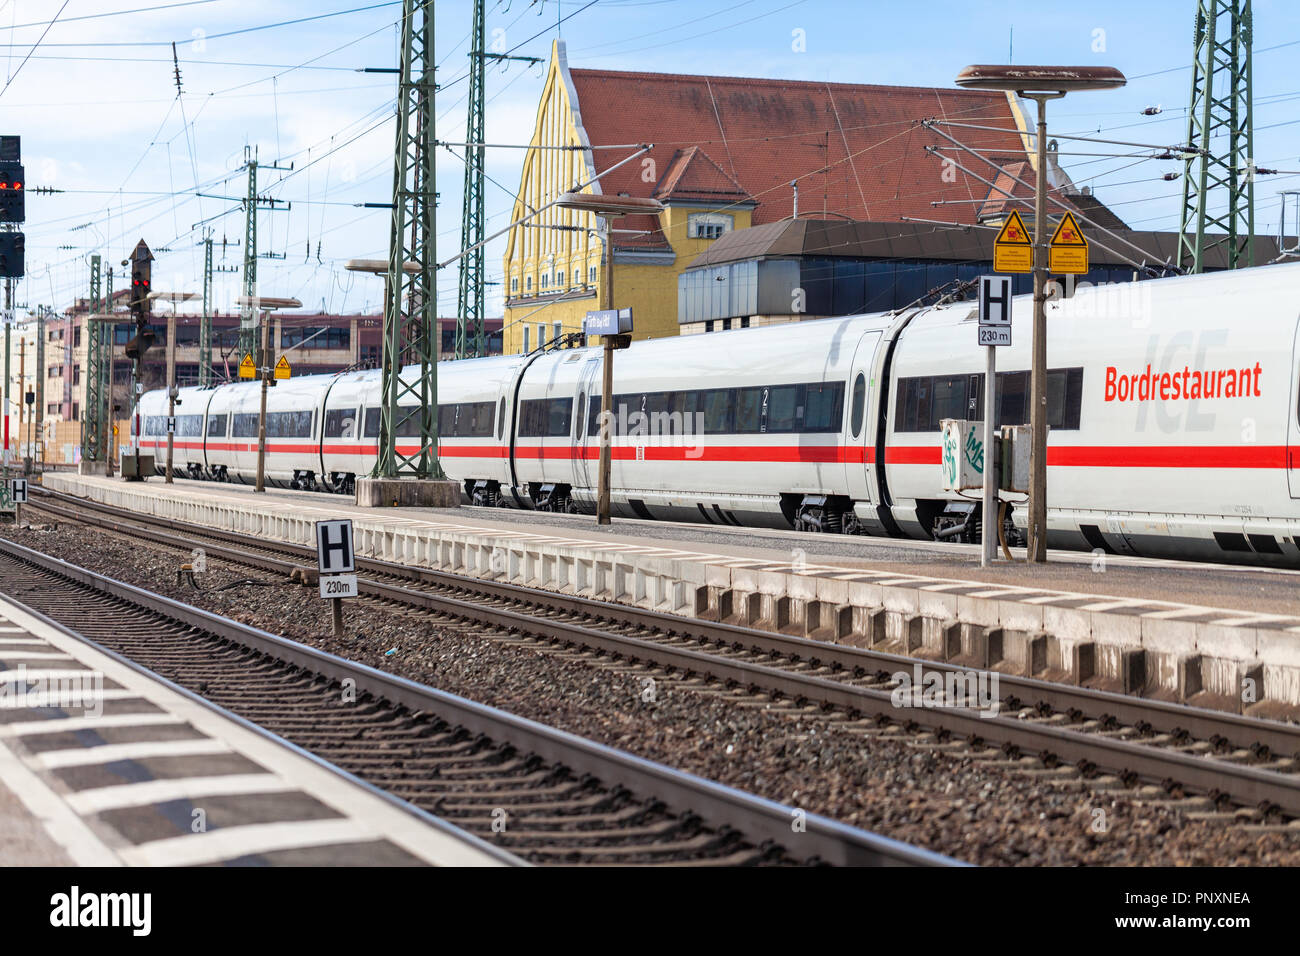 FUERTH / GERMANY - MARCH 11, 2018: ICE 3, intercity-Express train from Deutsche Bahn passes train station fuerth in germany. Stock Photo